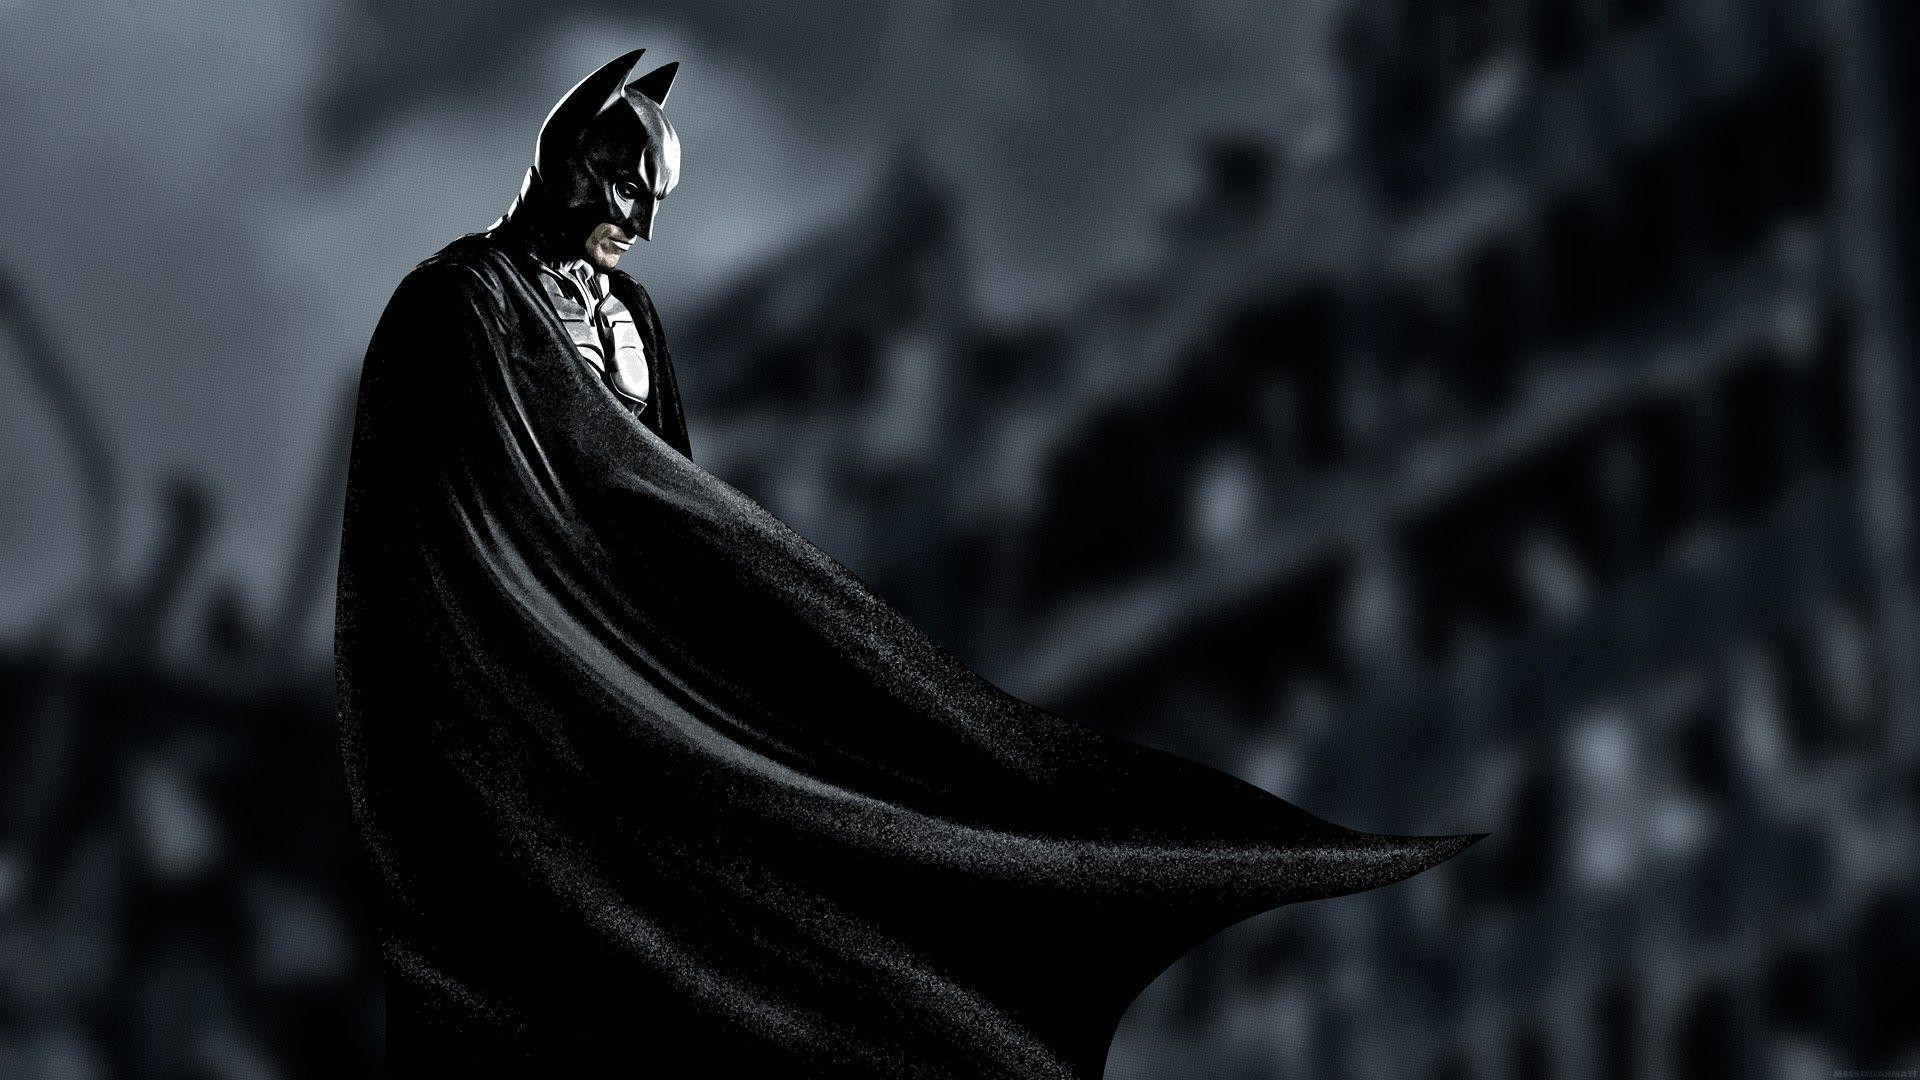 1920x1080 Wallpapers For > Batman Wallpapers Hd For Pc